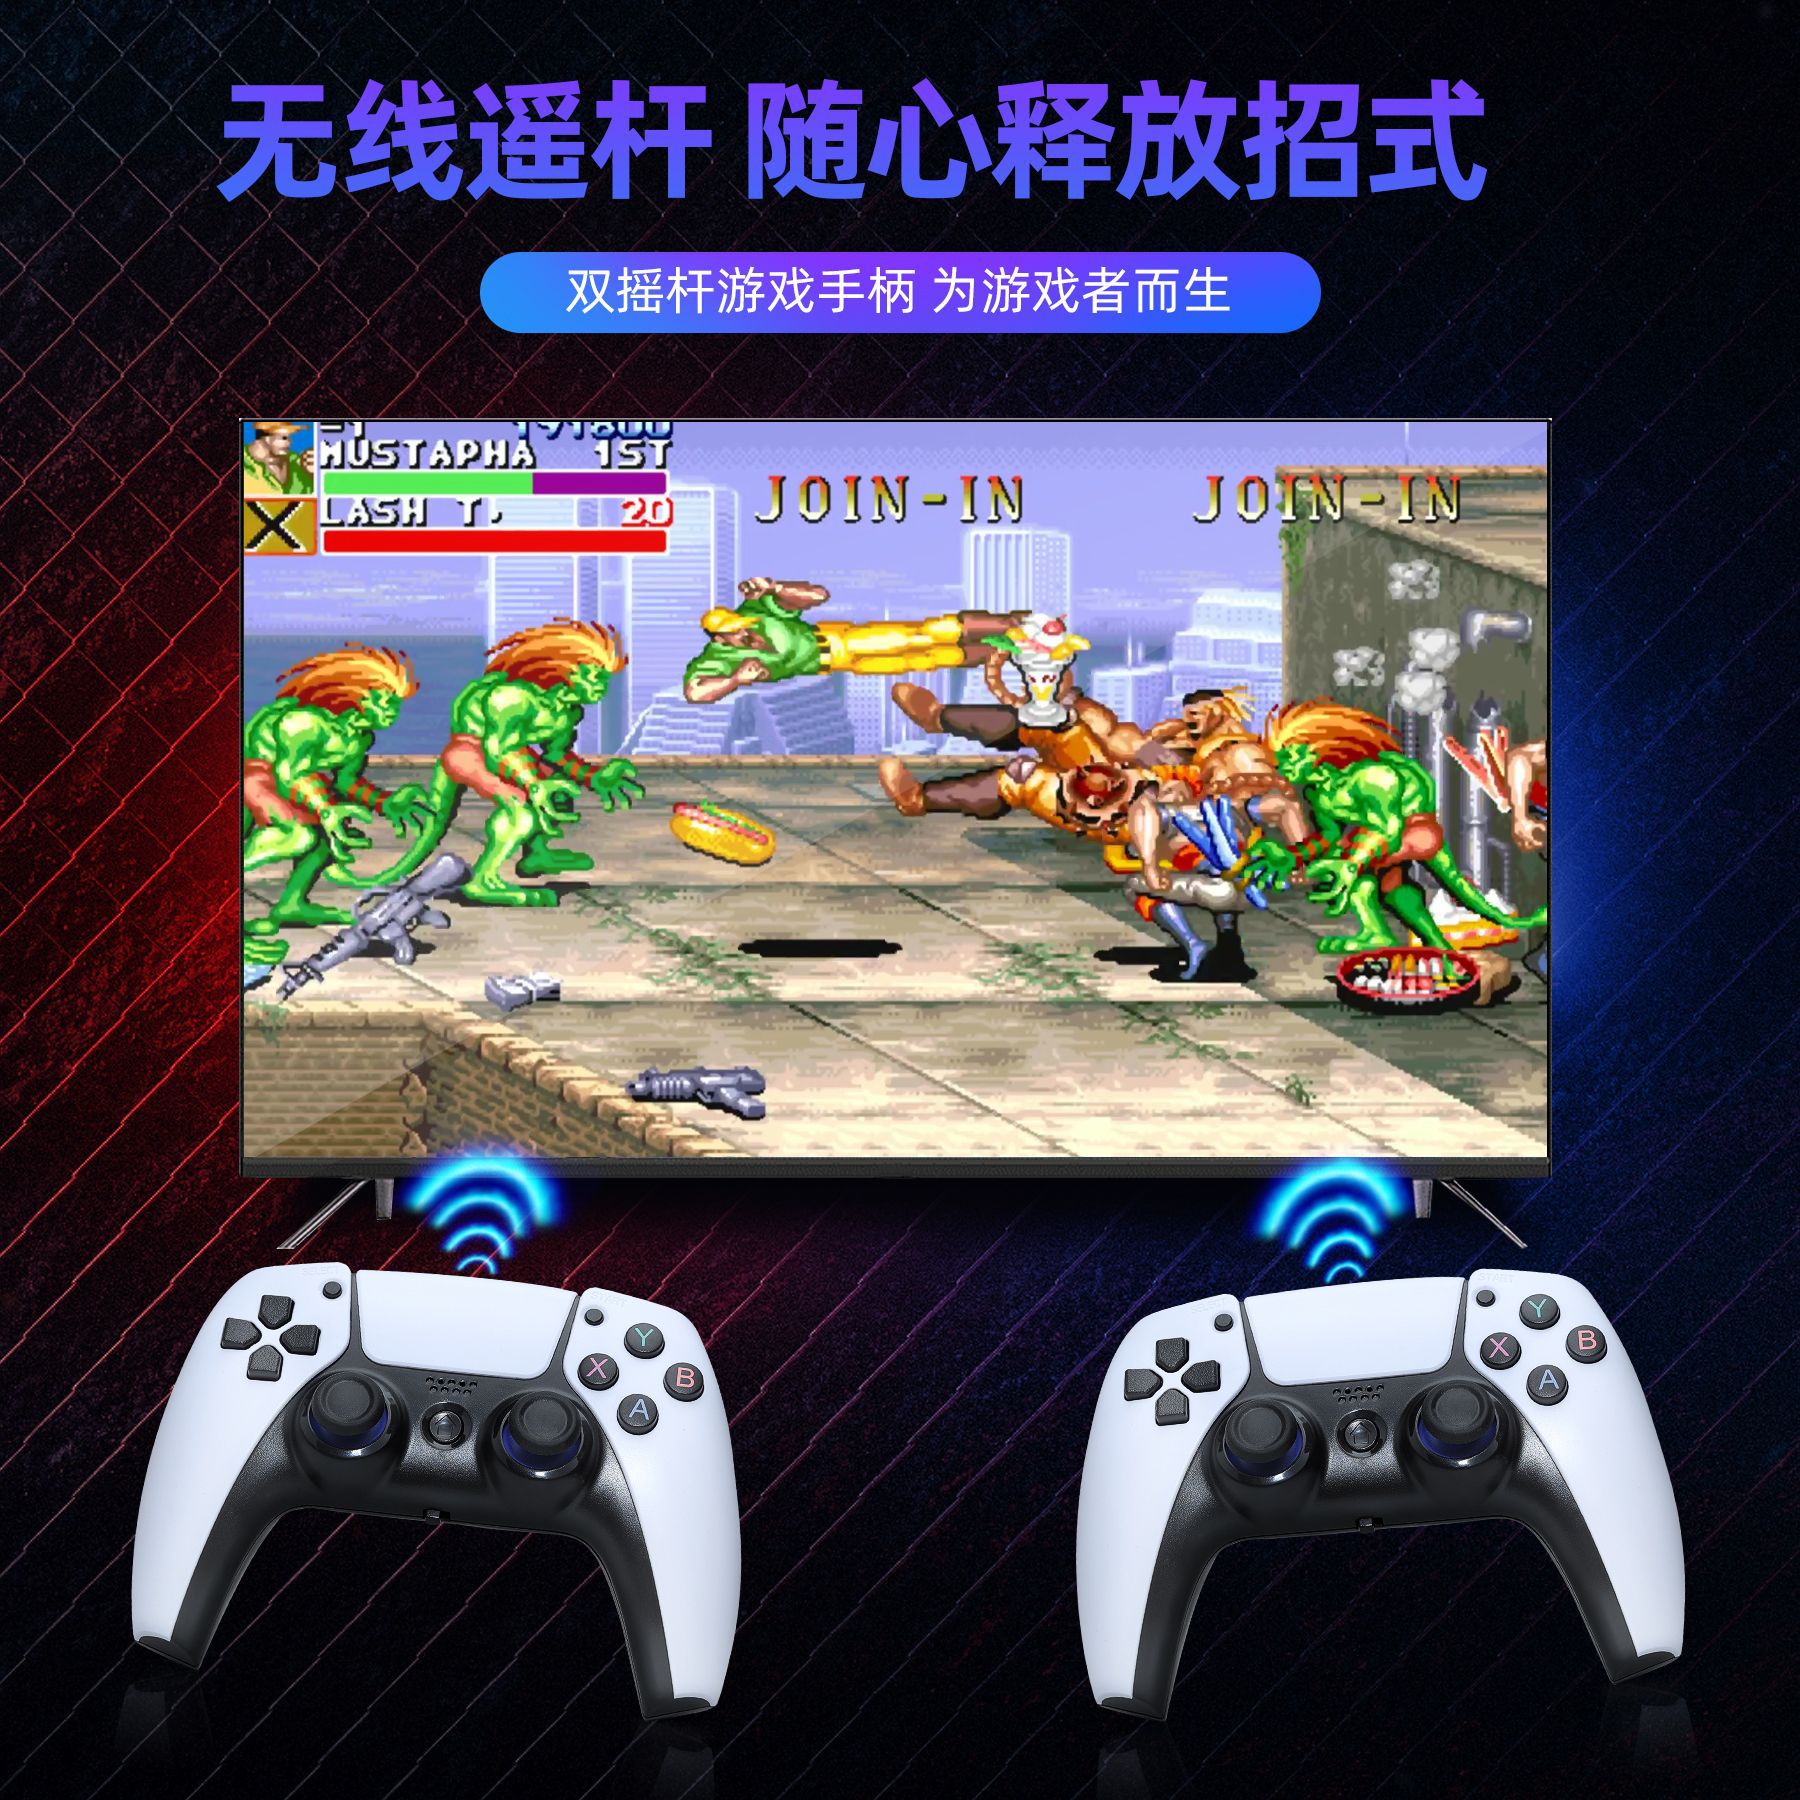 U10 Hd Game Console 2.4G Technology Android TV Retro Game Console Built-in Double Game Handle